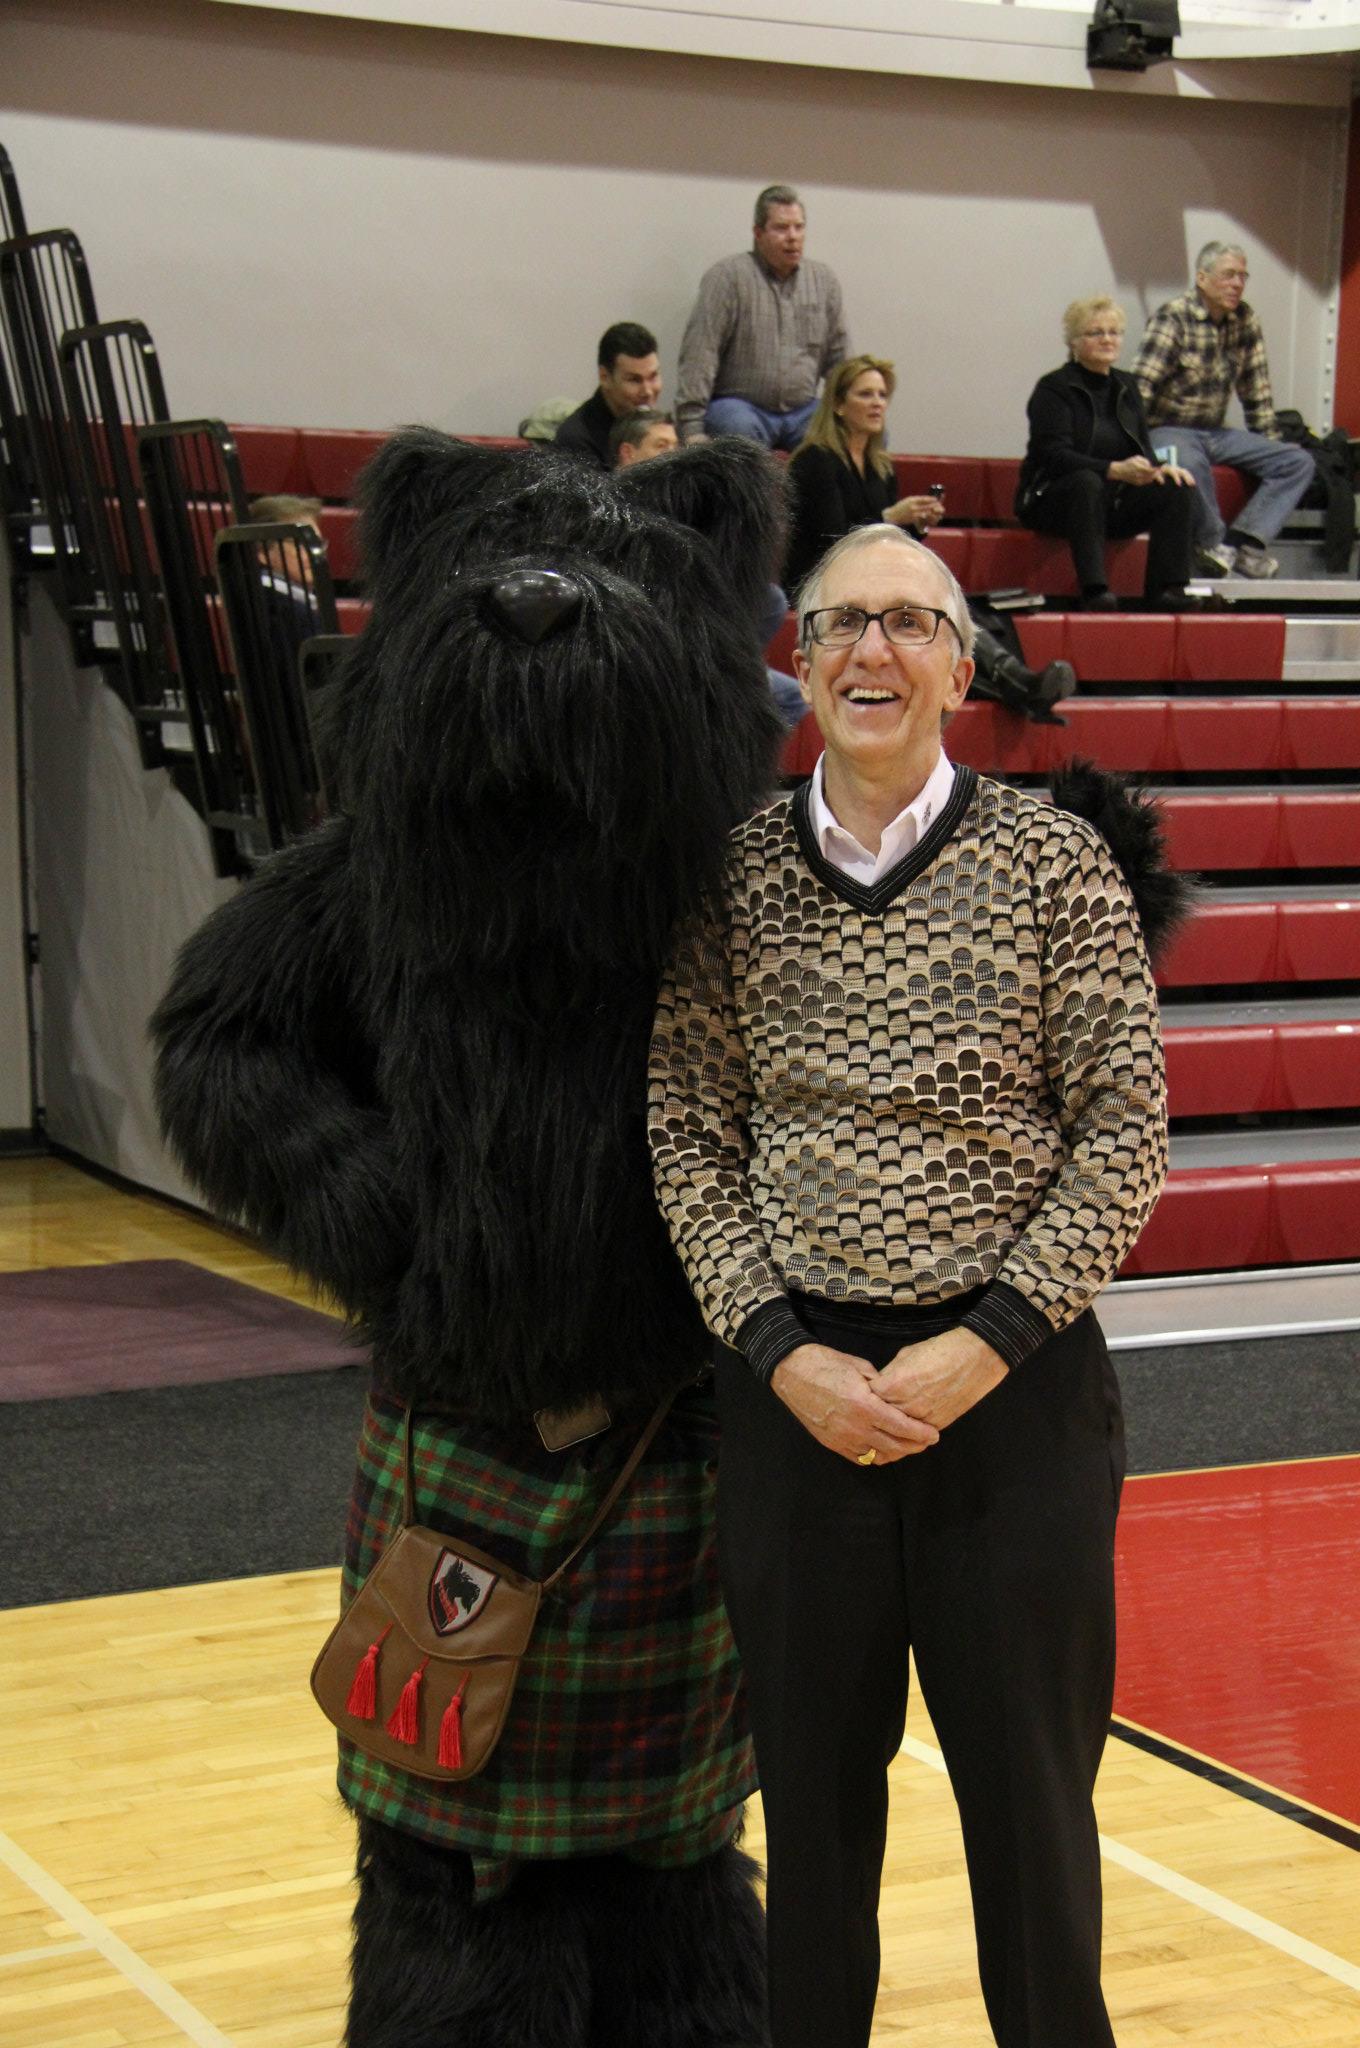 Mr. Gerlach with Scotty, our favorite mascot!